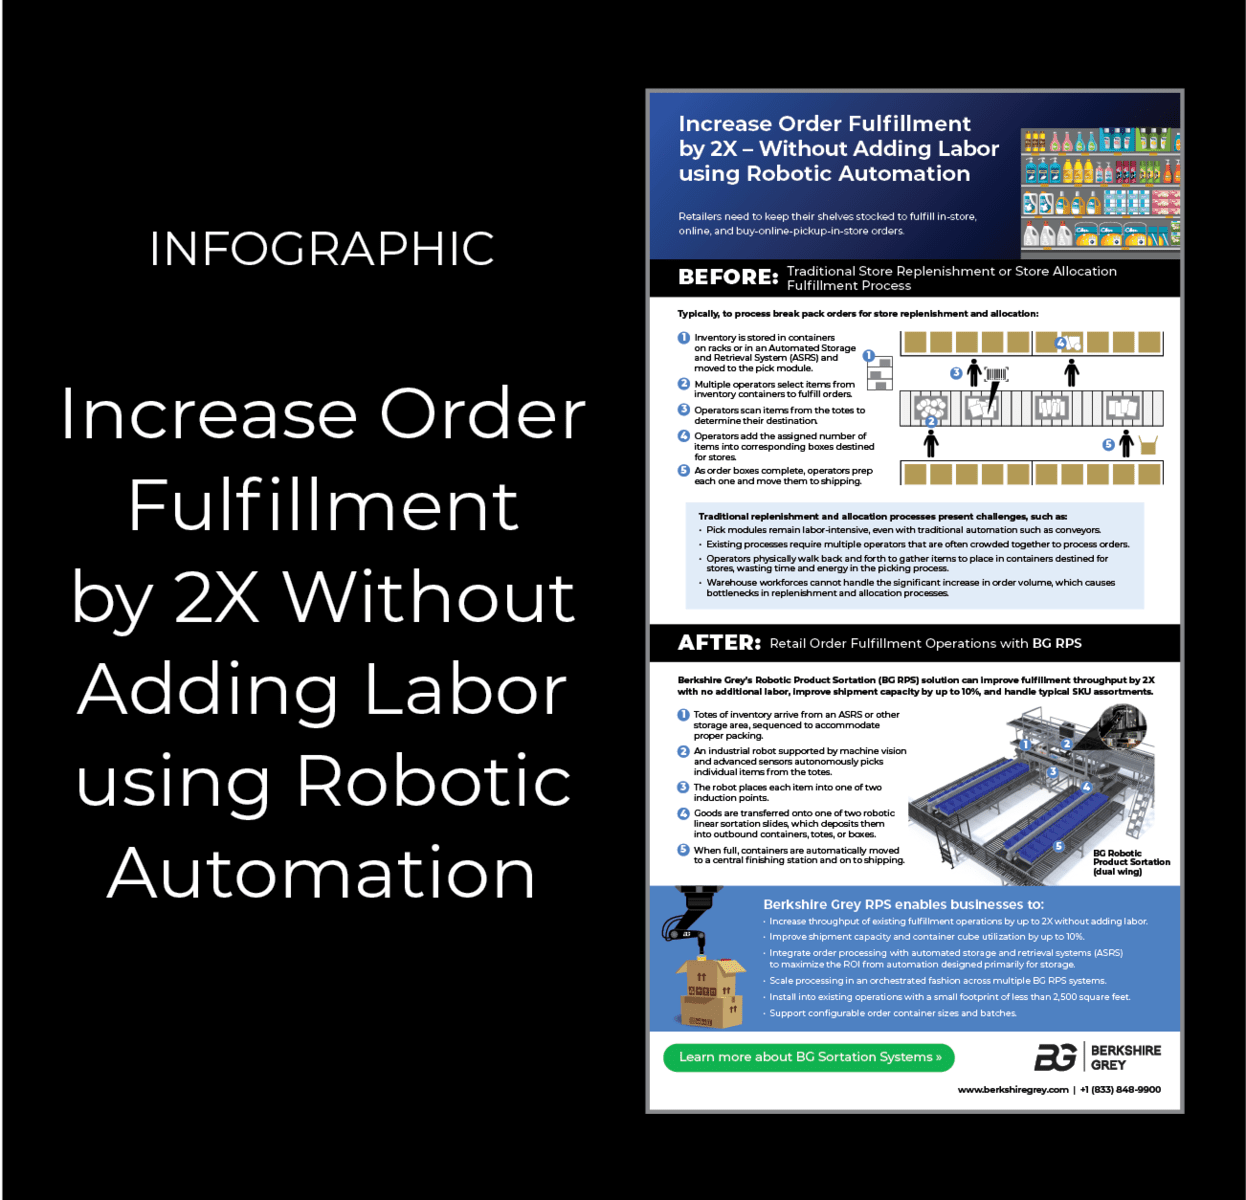 Berkshire Grey Infographic - Increase Order Fulfillment by 2x Without Adding Labor using Robotic Automation